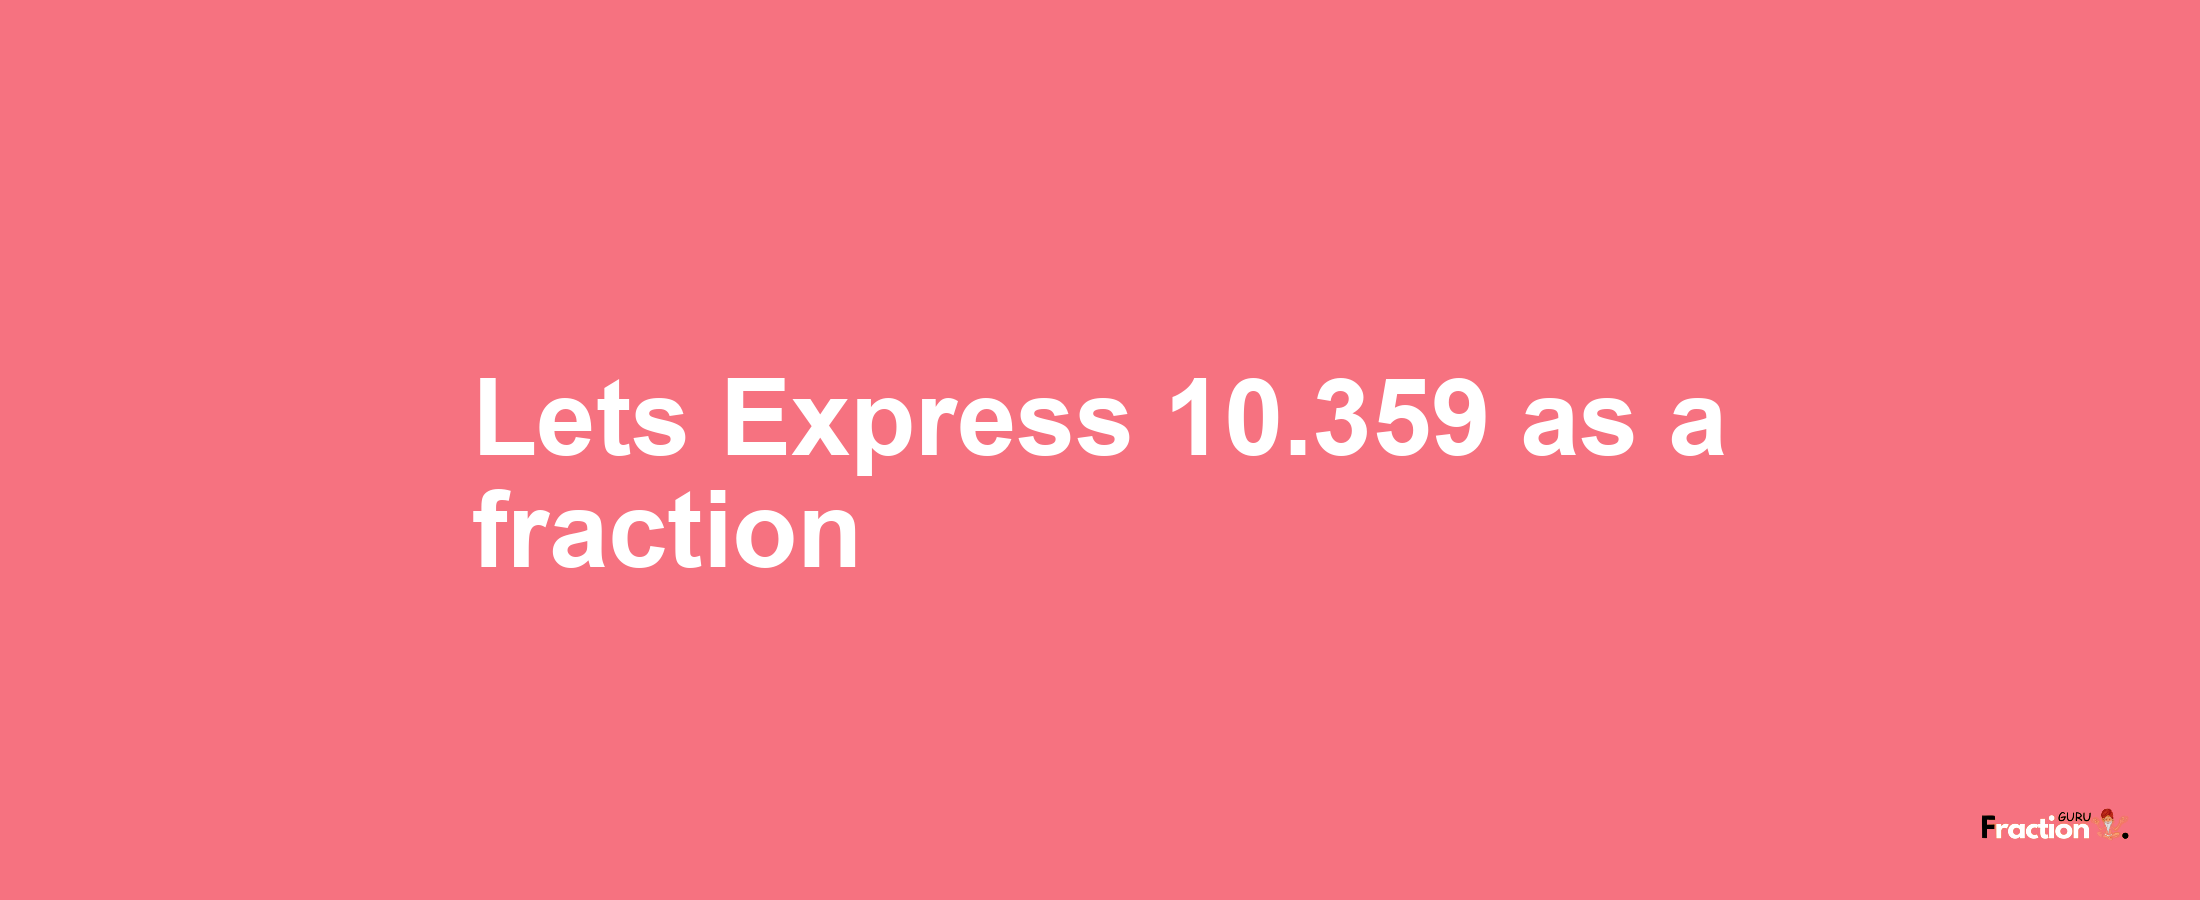 Lets Express 10.359 as afraction